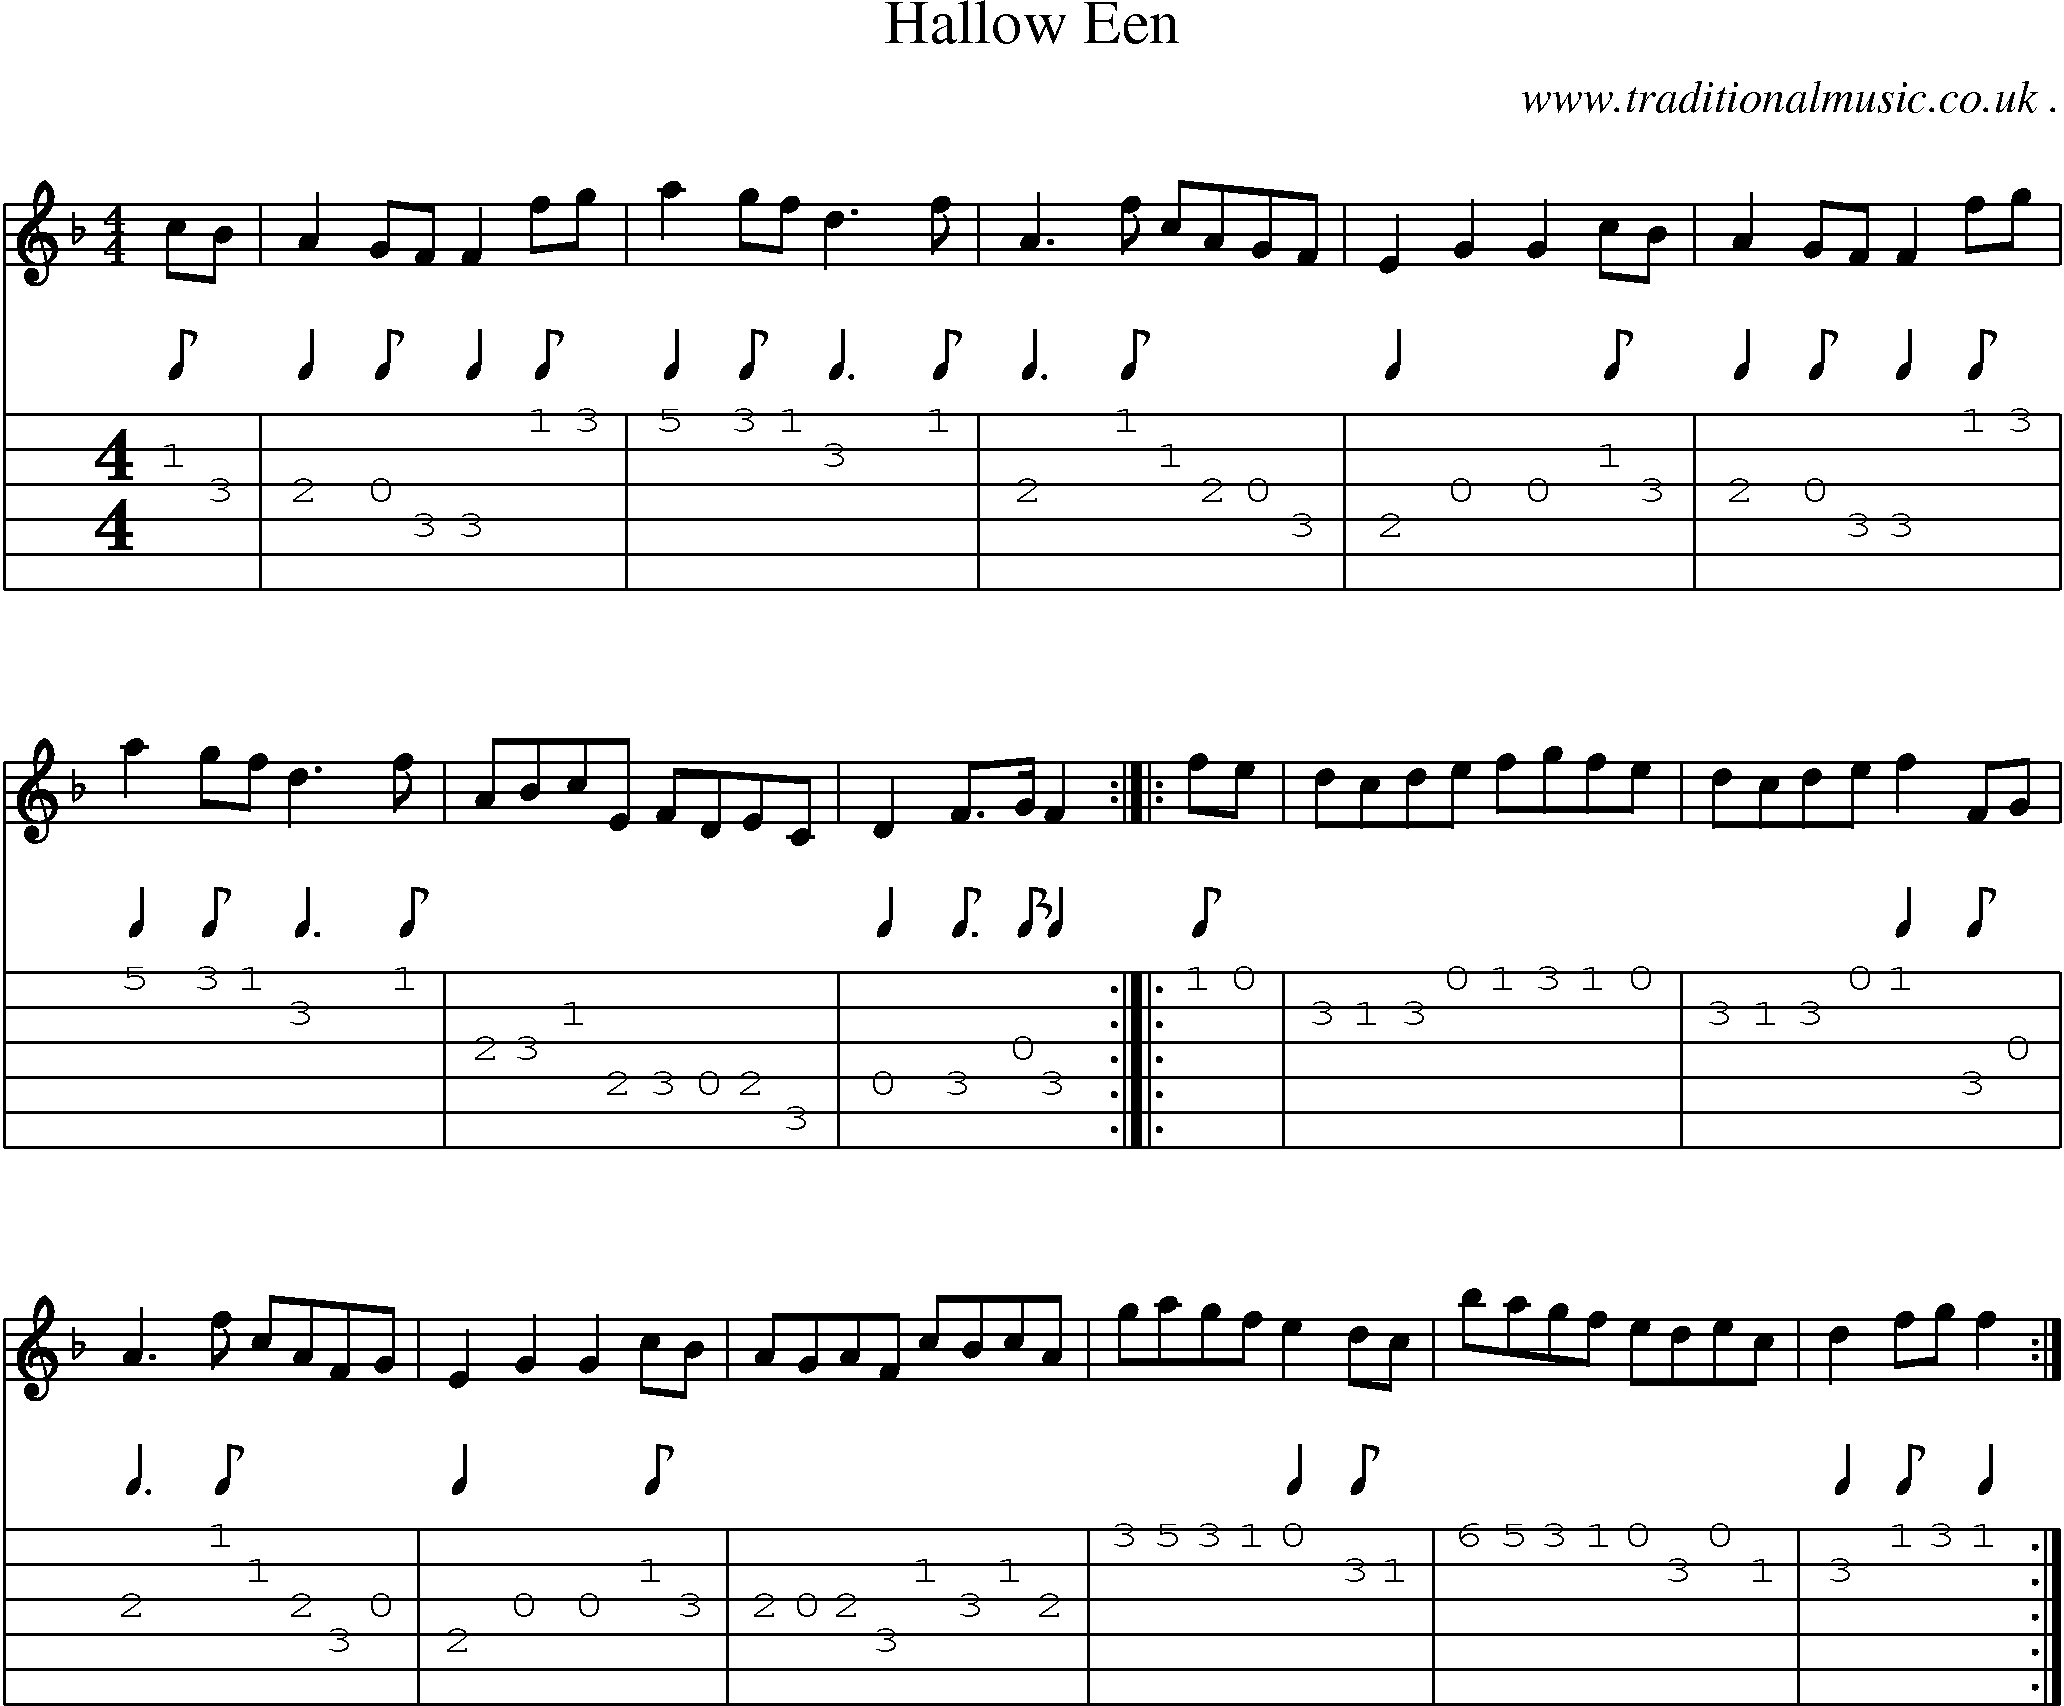 Sheet-music  score, Chords and Guitar Tabs for Hallow Een